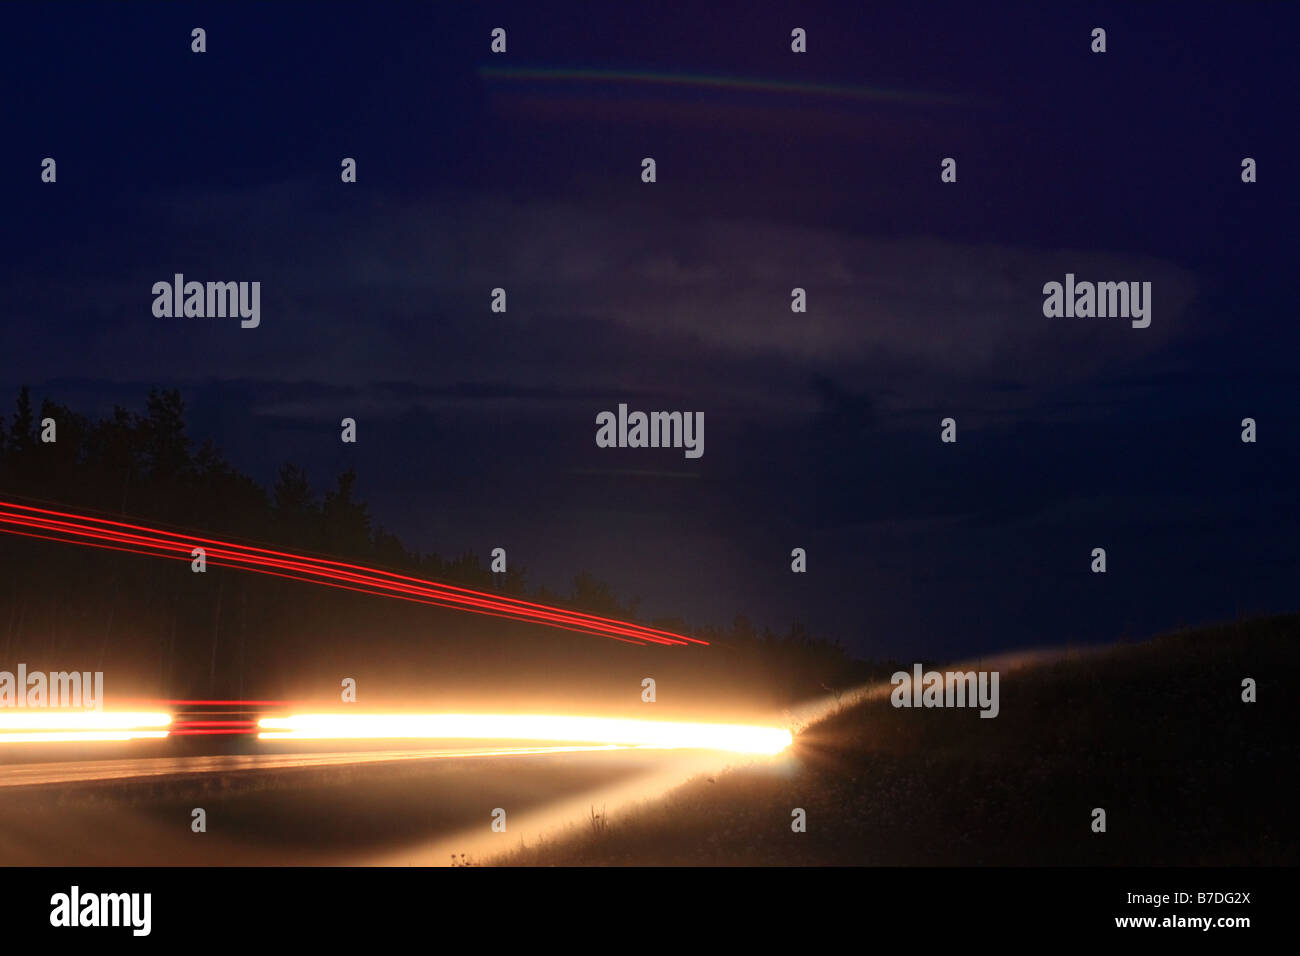 Car lights at night in nothern Alberta Stock Photo